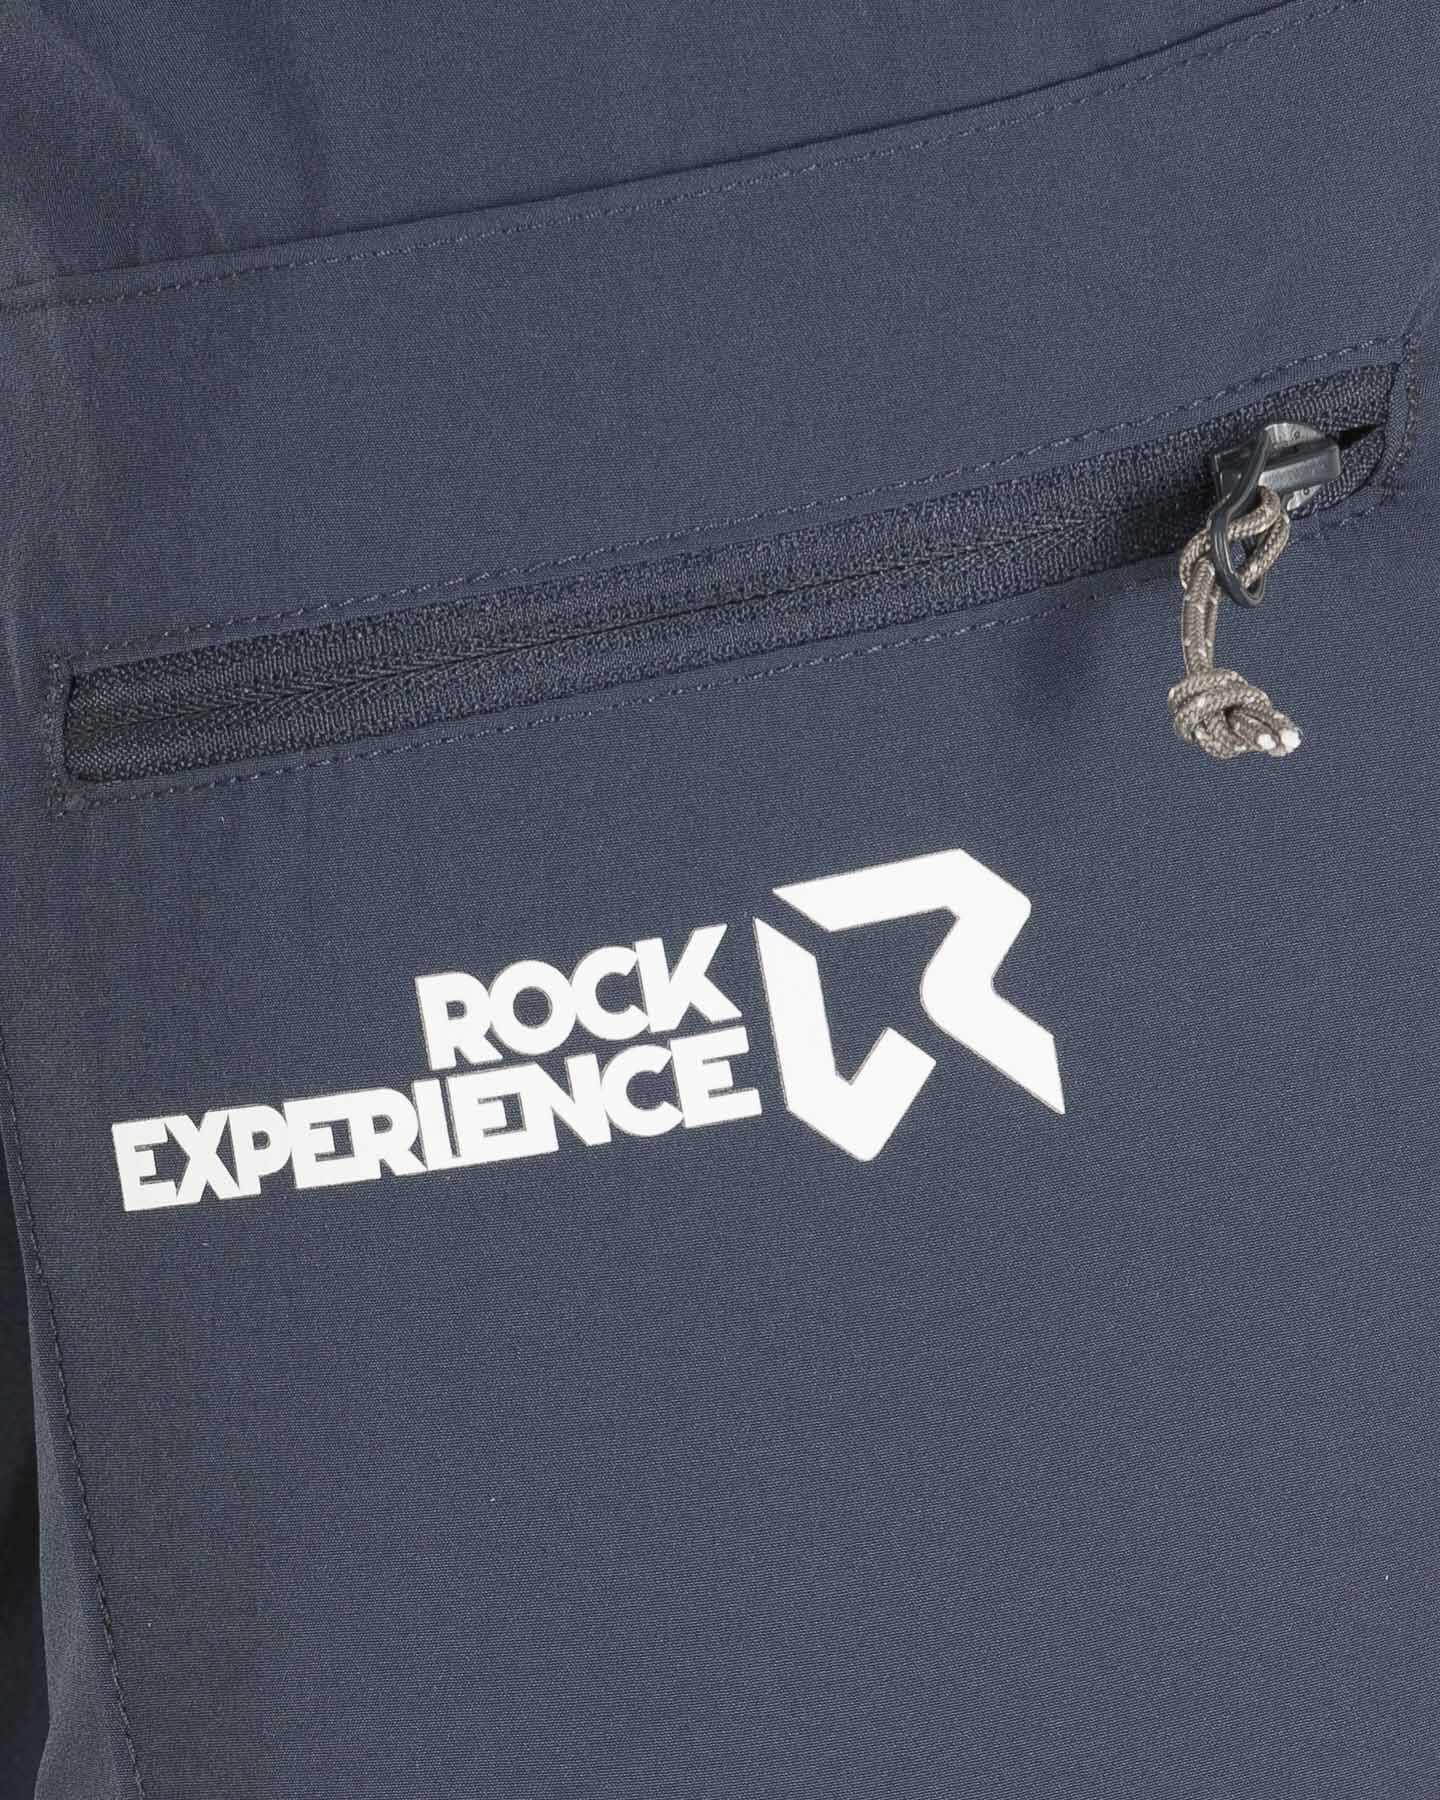  Pantalone outdoor ROCK EXPERIENCE OBSERVER ZIP OFF M S4089966|1|S scatto 2